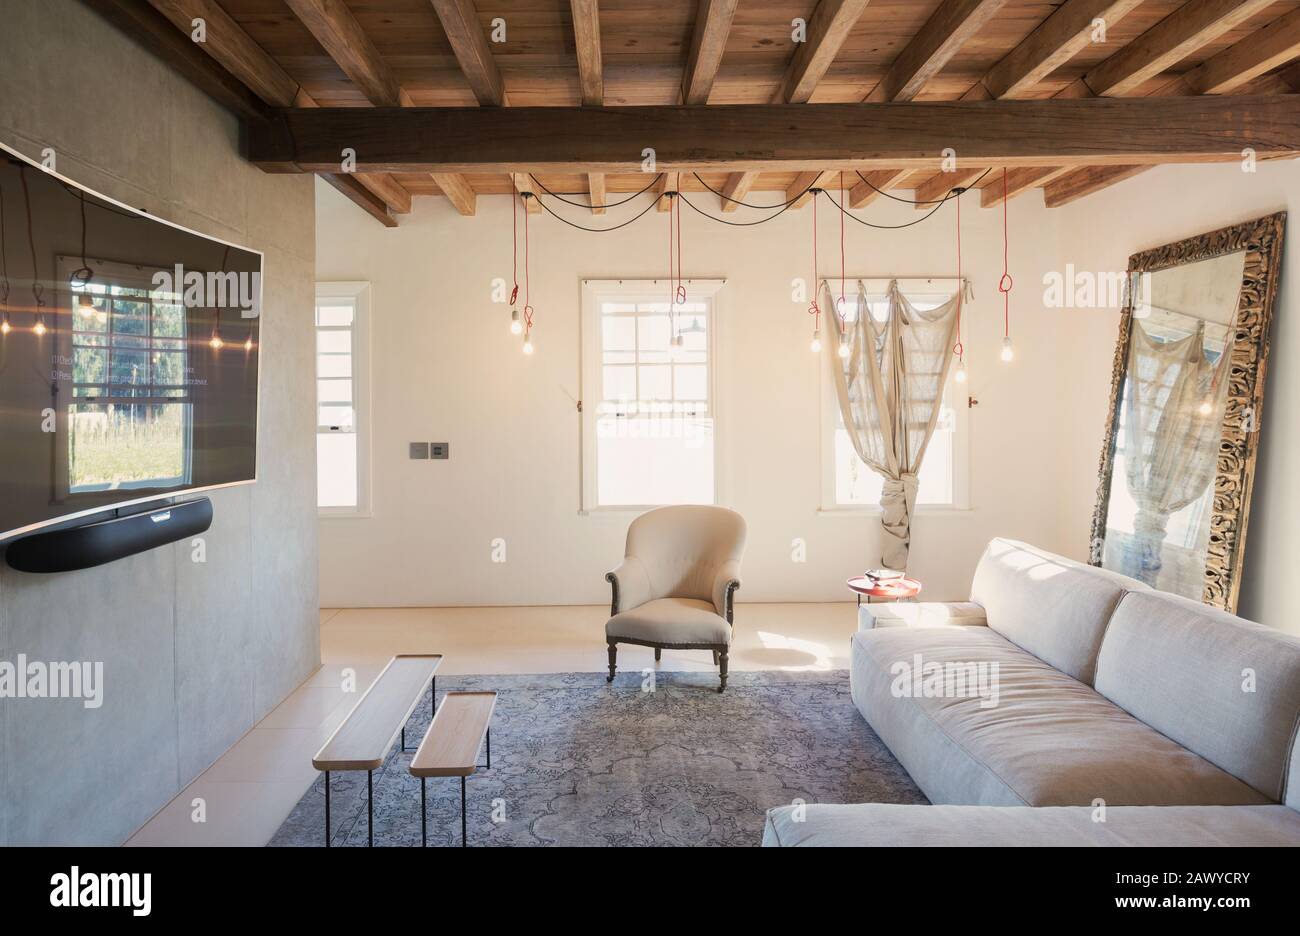 Home showcase interior living room with wood beam ceiling Stock Photo